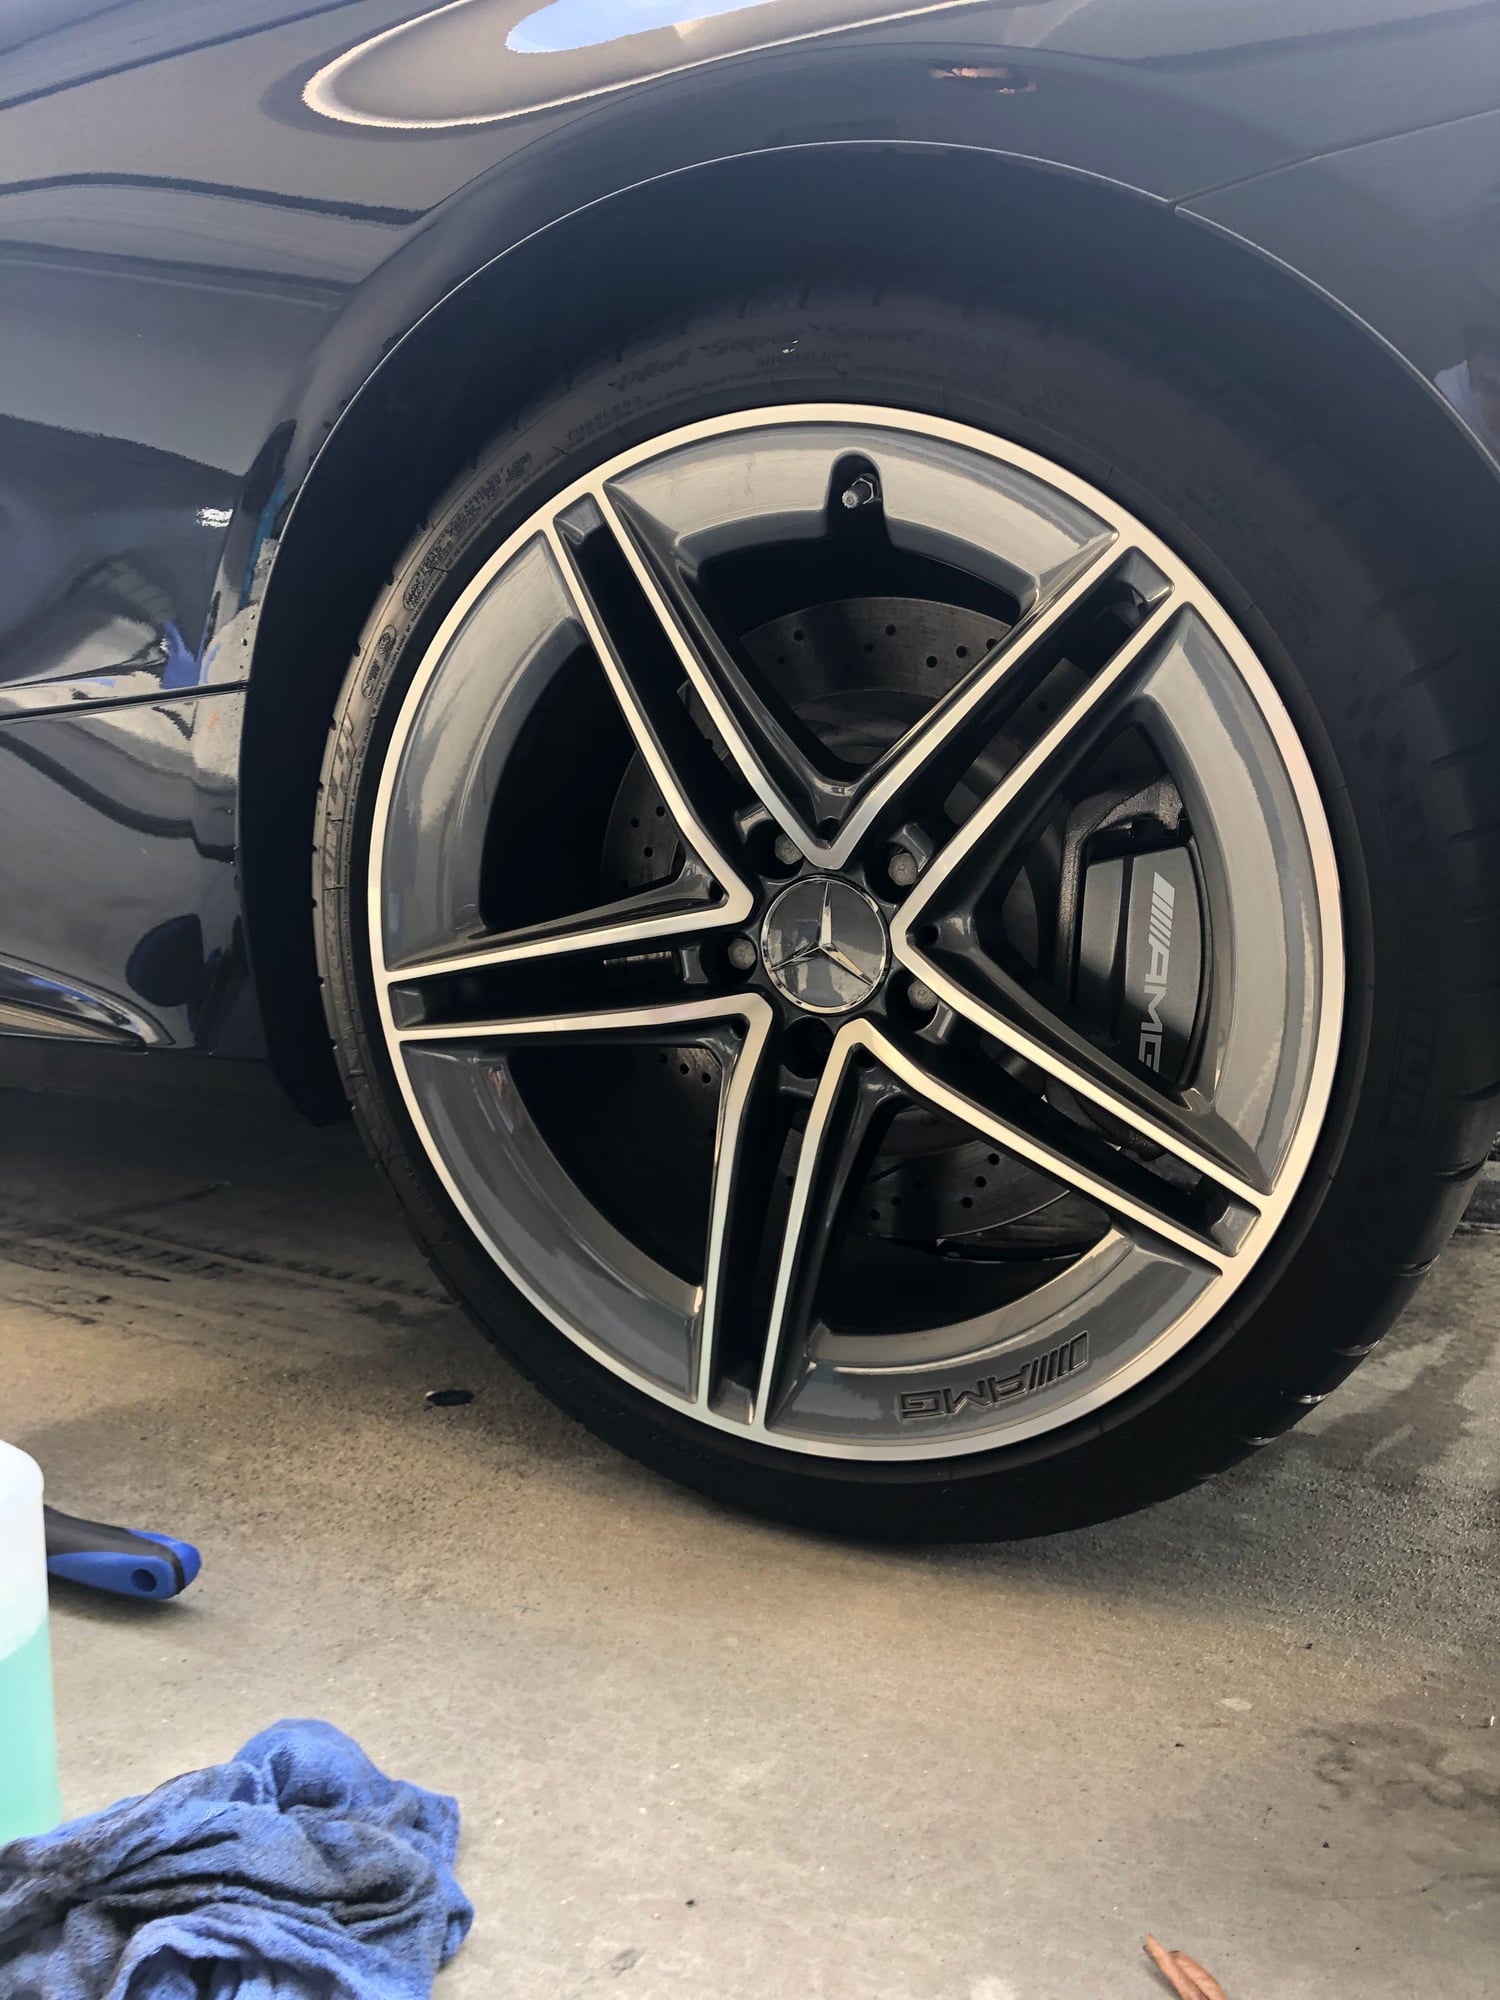 Wheels and Tires/Axles - 2019 C63 amg Coupe wheels - Used - All Years Mercedes-Benz C63 AMG - Irvine, CA 92618, United States